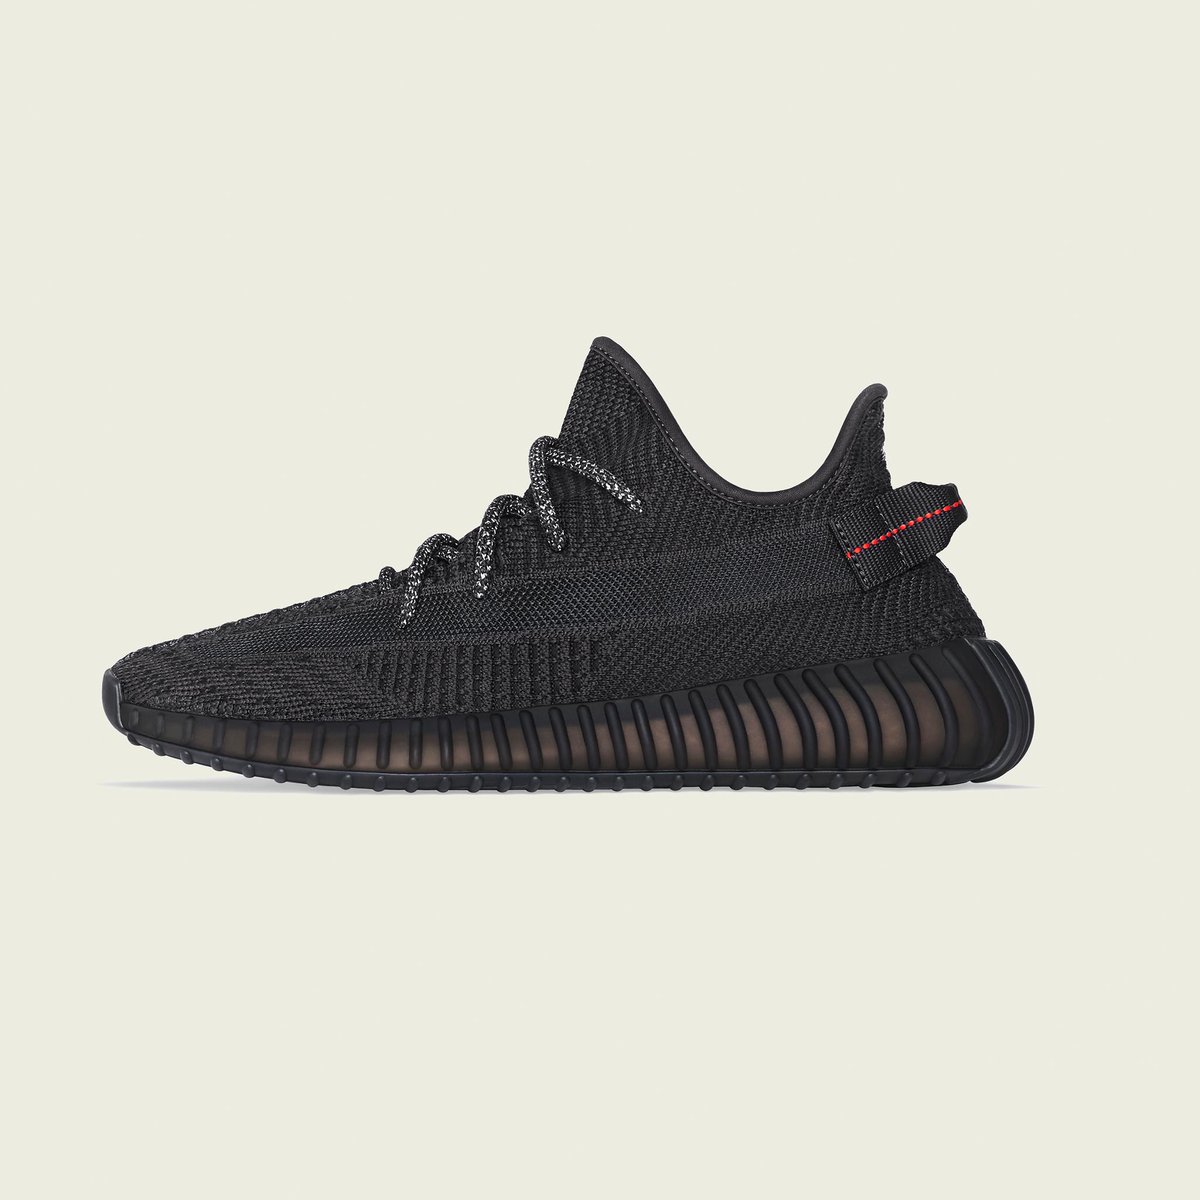 LIMITED-QUANTITY Yeezy Boost 350 V2 